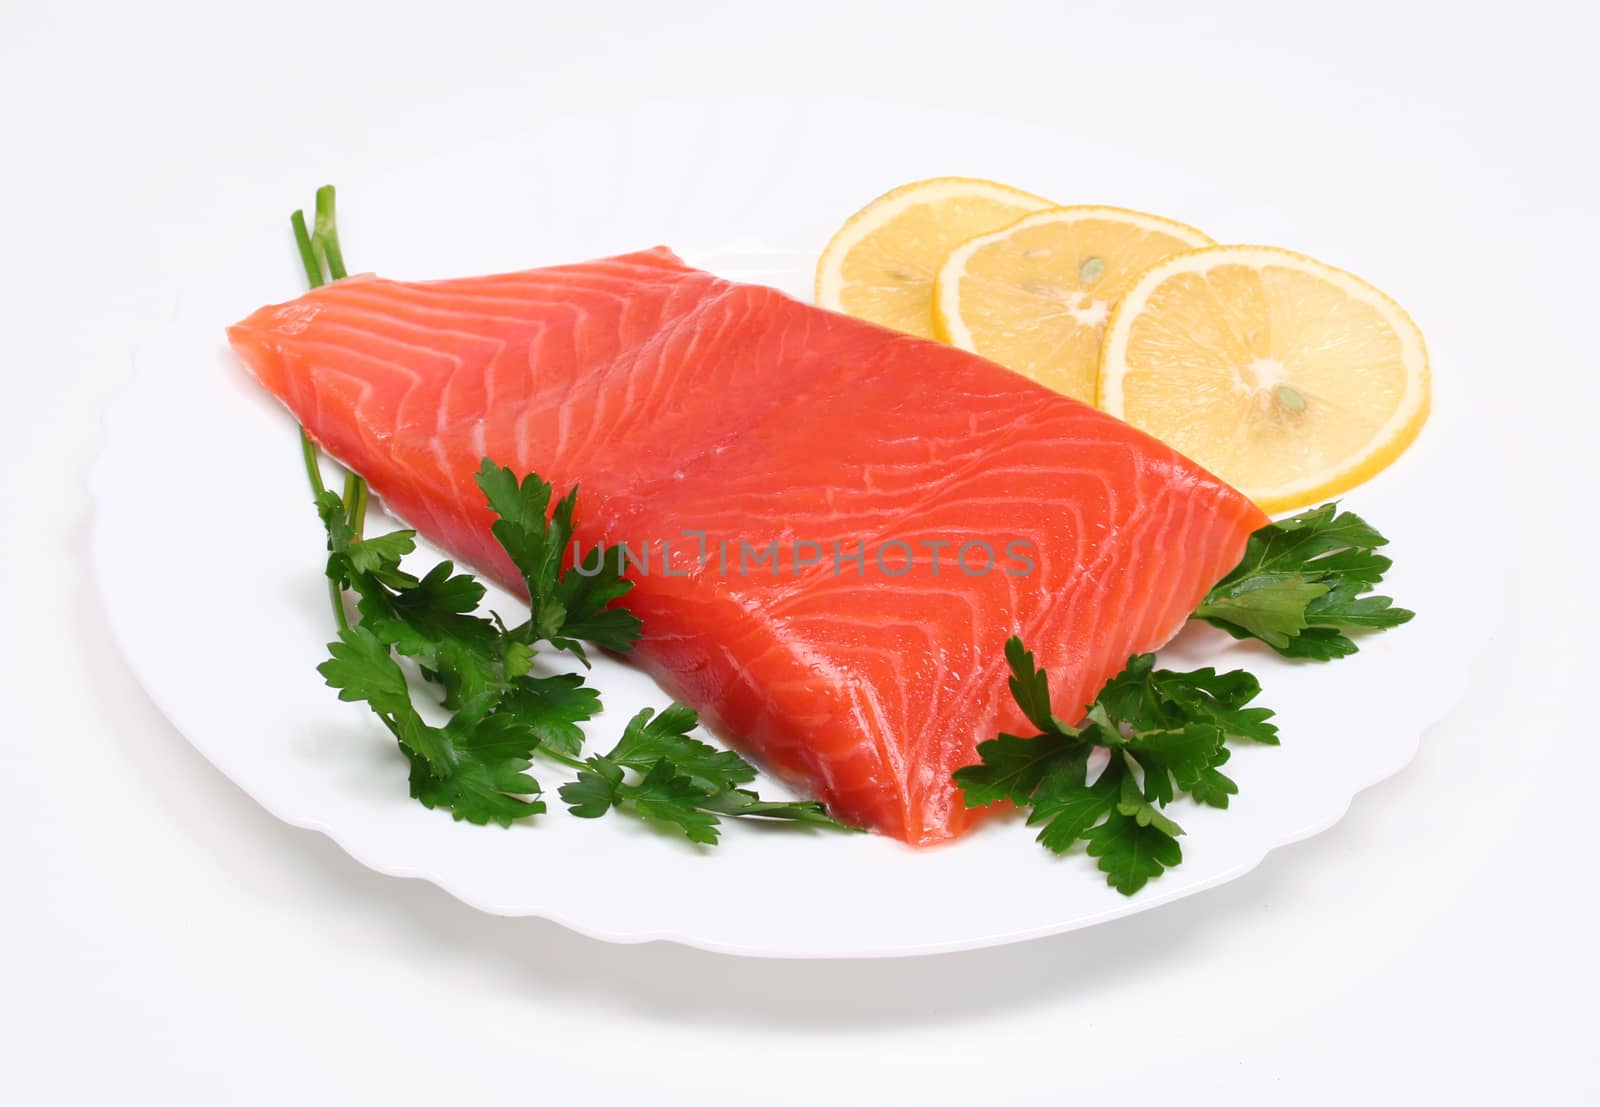 Salmon steak with lemon slices and parsley on white plate